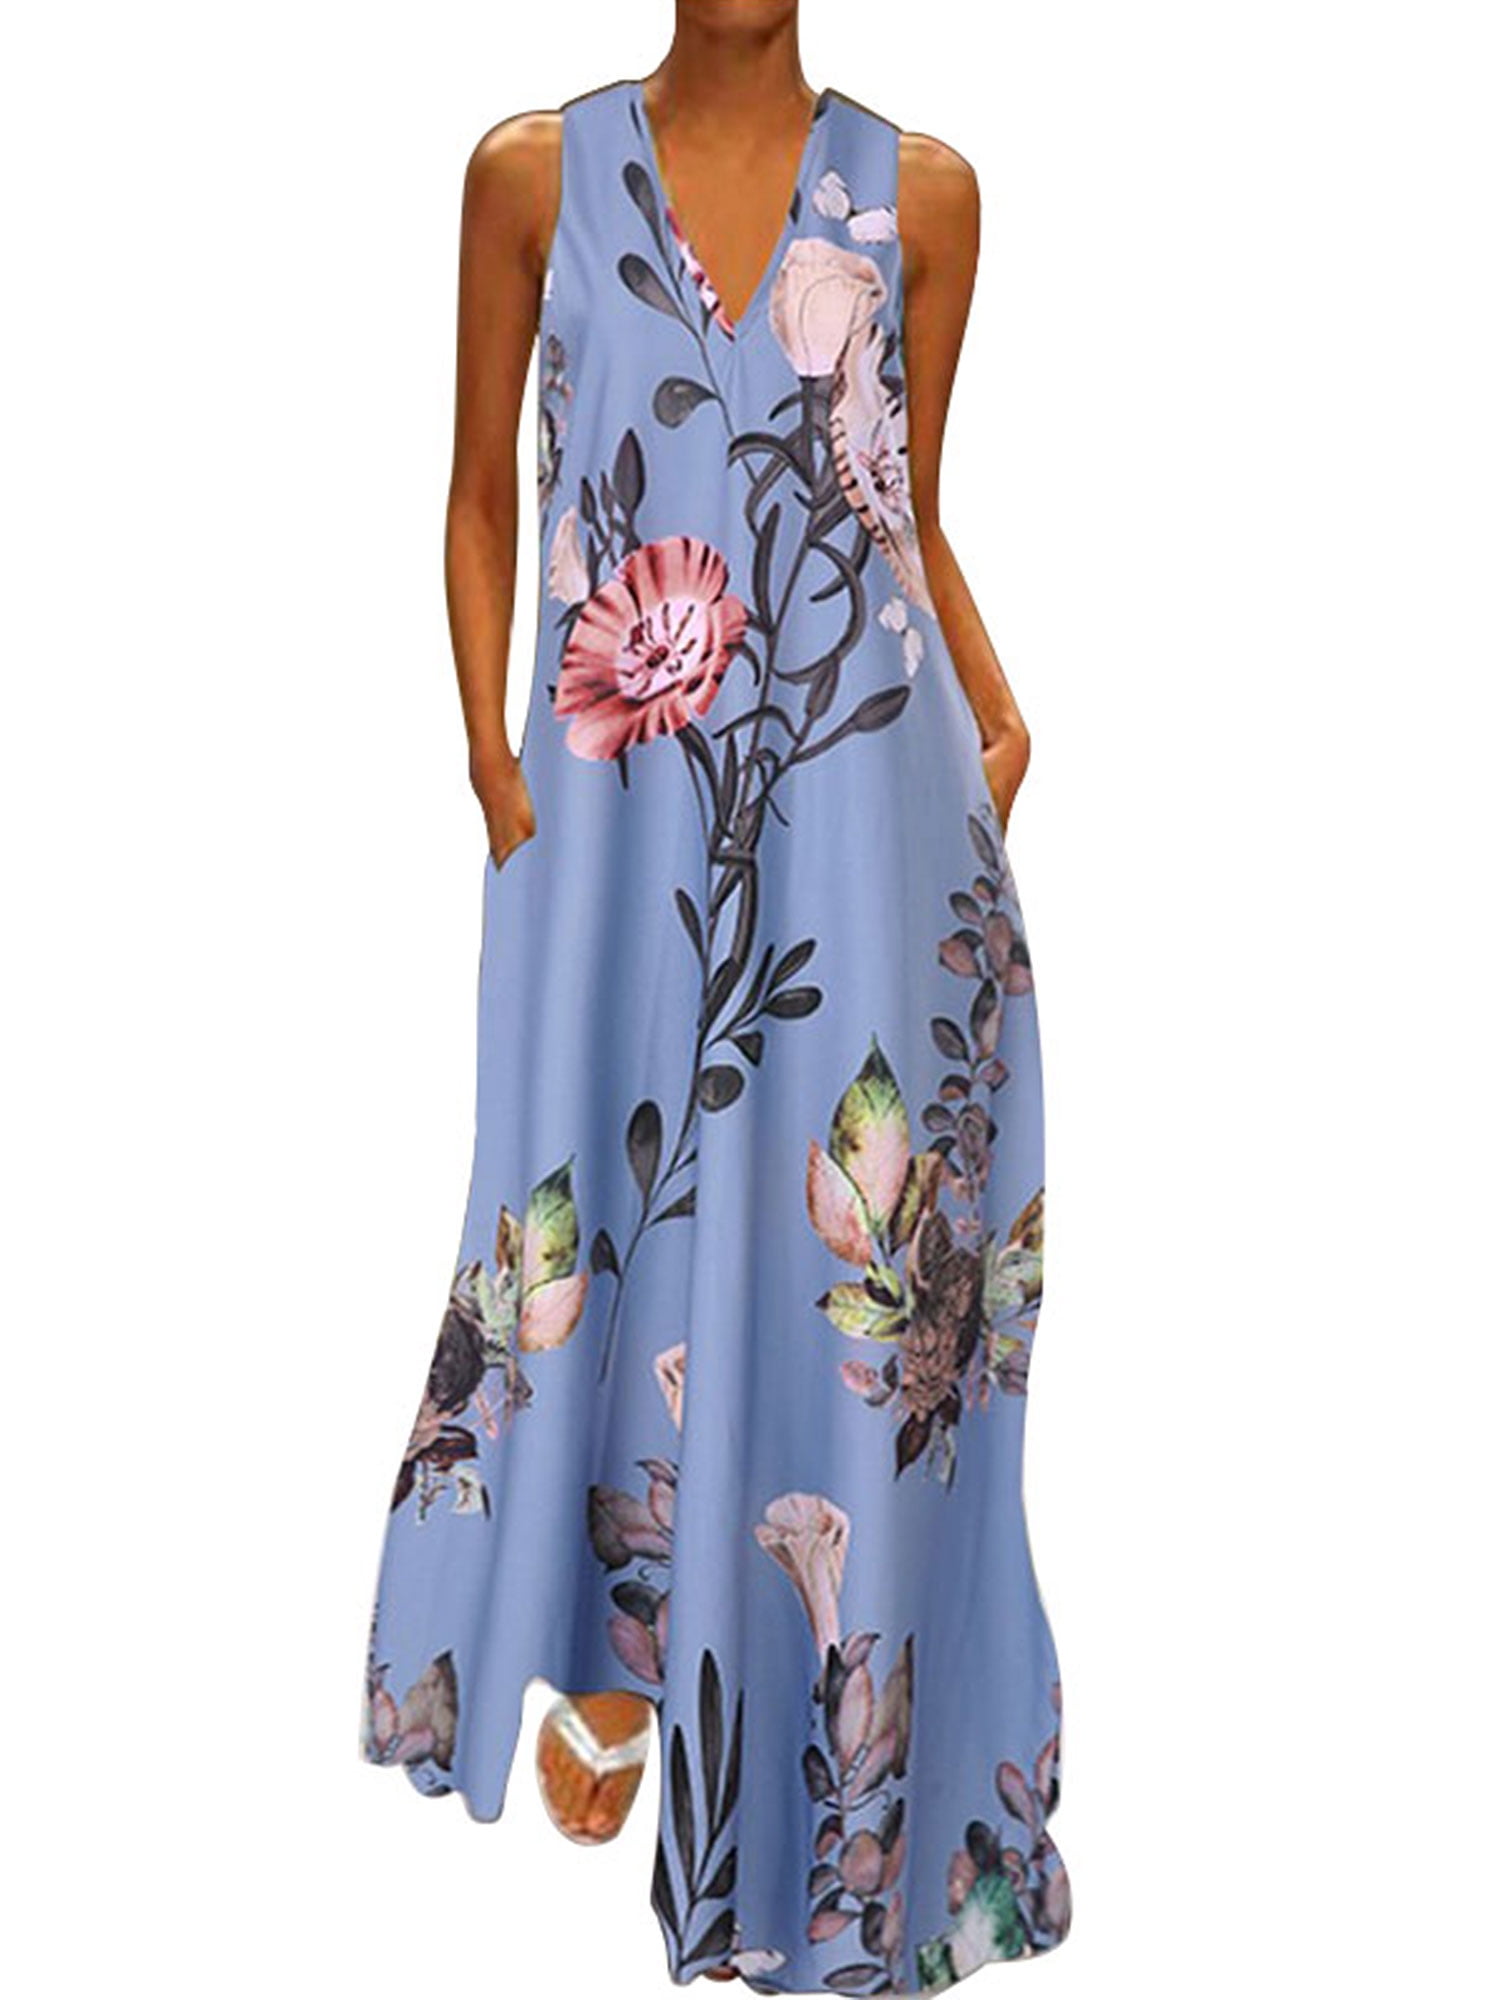 Womens Summer Boho Sleeveless Floral Print Tank Long Maxi Dress Party Dresses Ethnic Style Plus Size with Pockets 